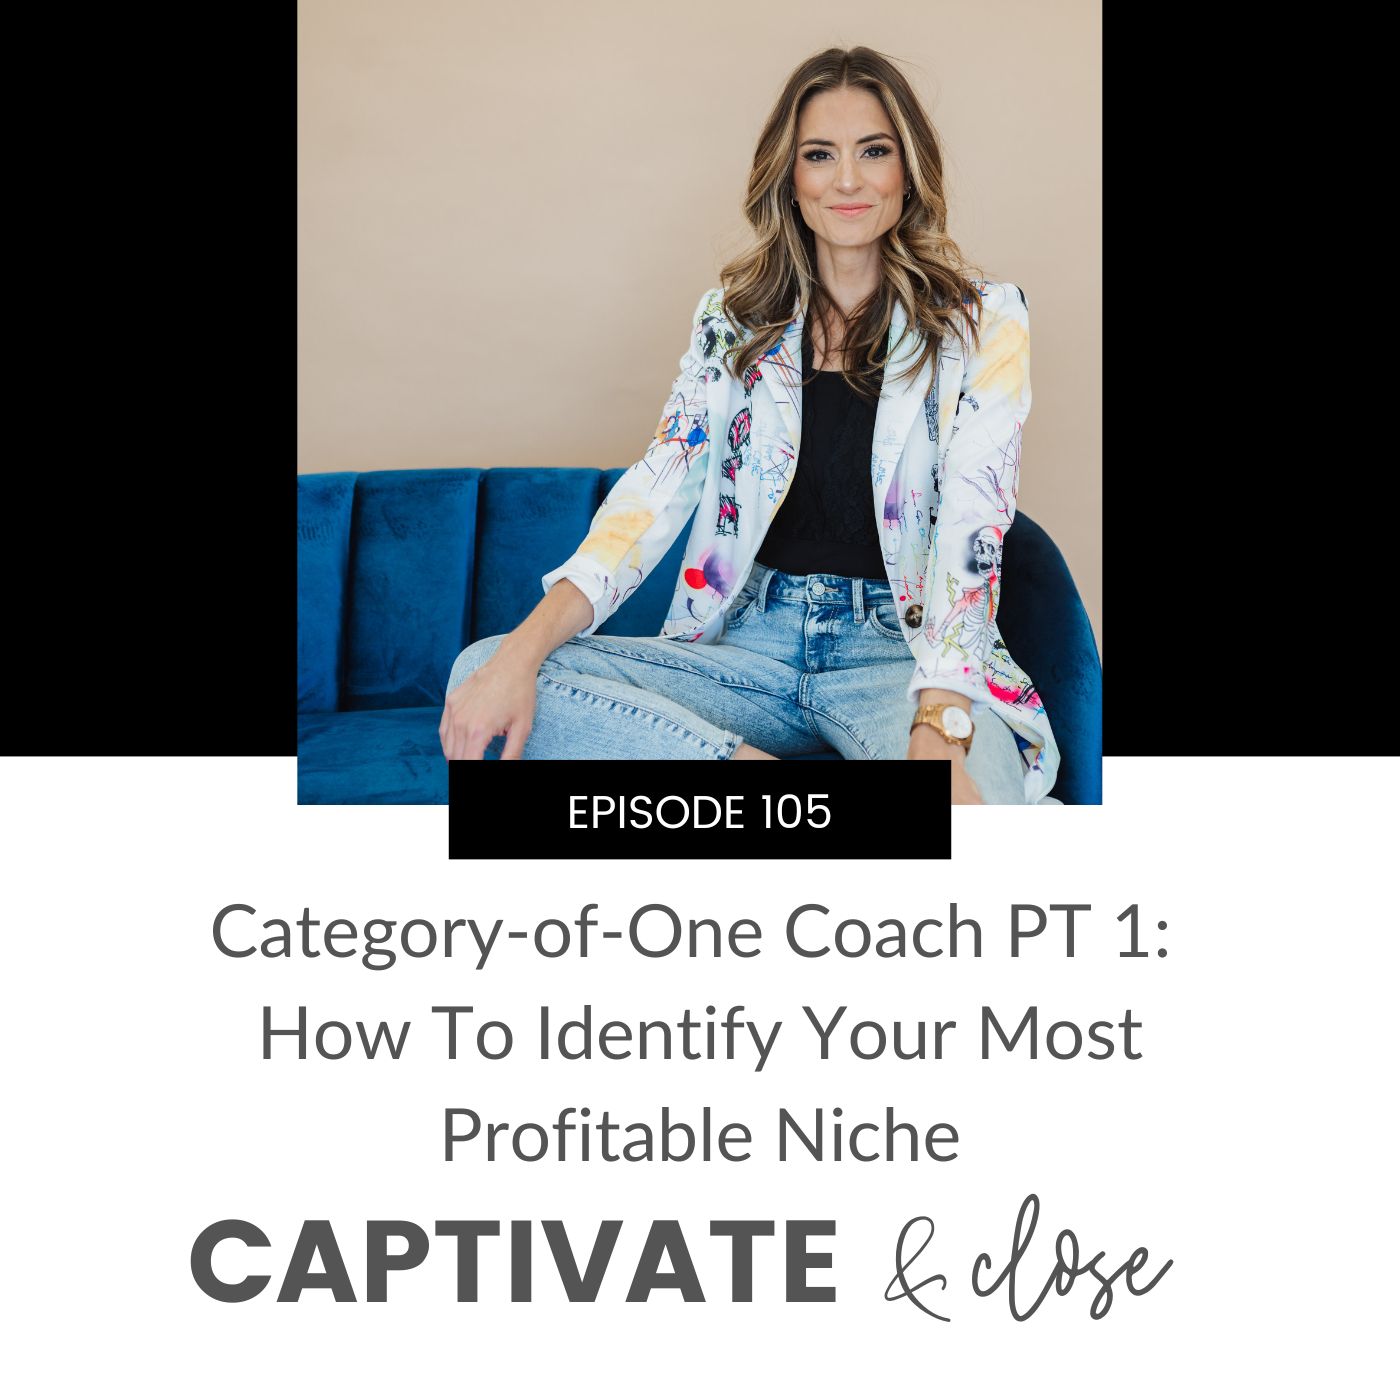 CATEGORY-OF-ONE PT I: How To Identify Your Most Profitable Niche